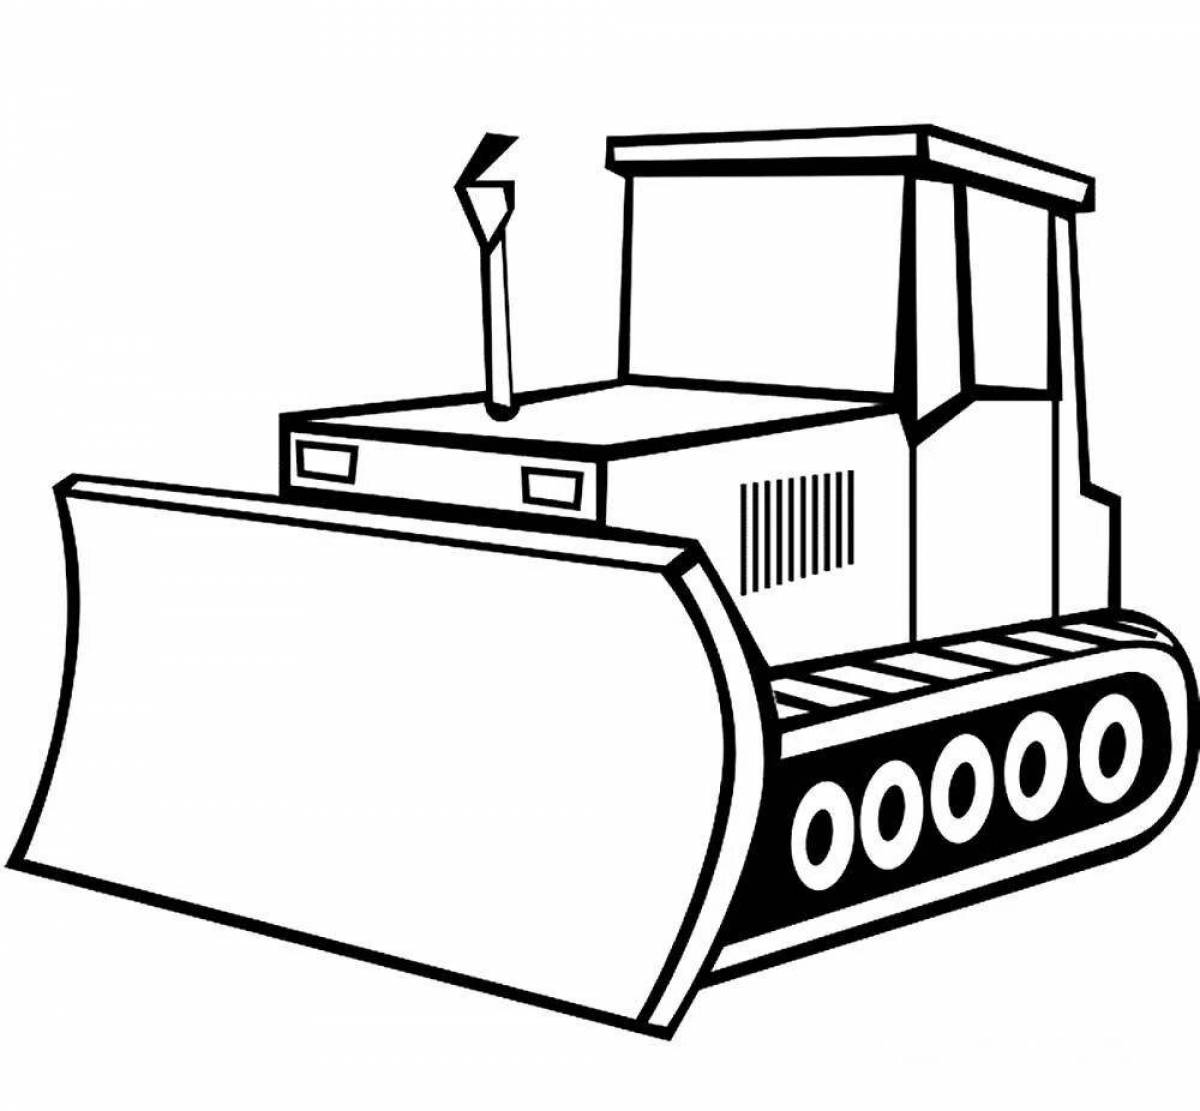 Colorful bulldozer coloring book for kids